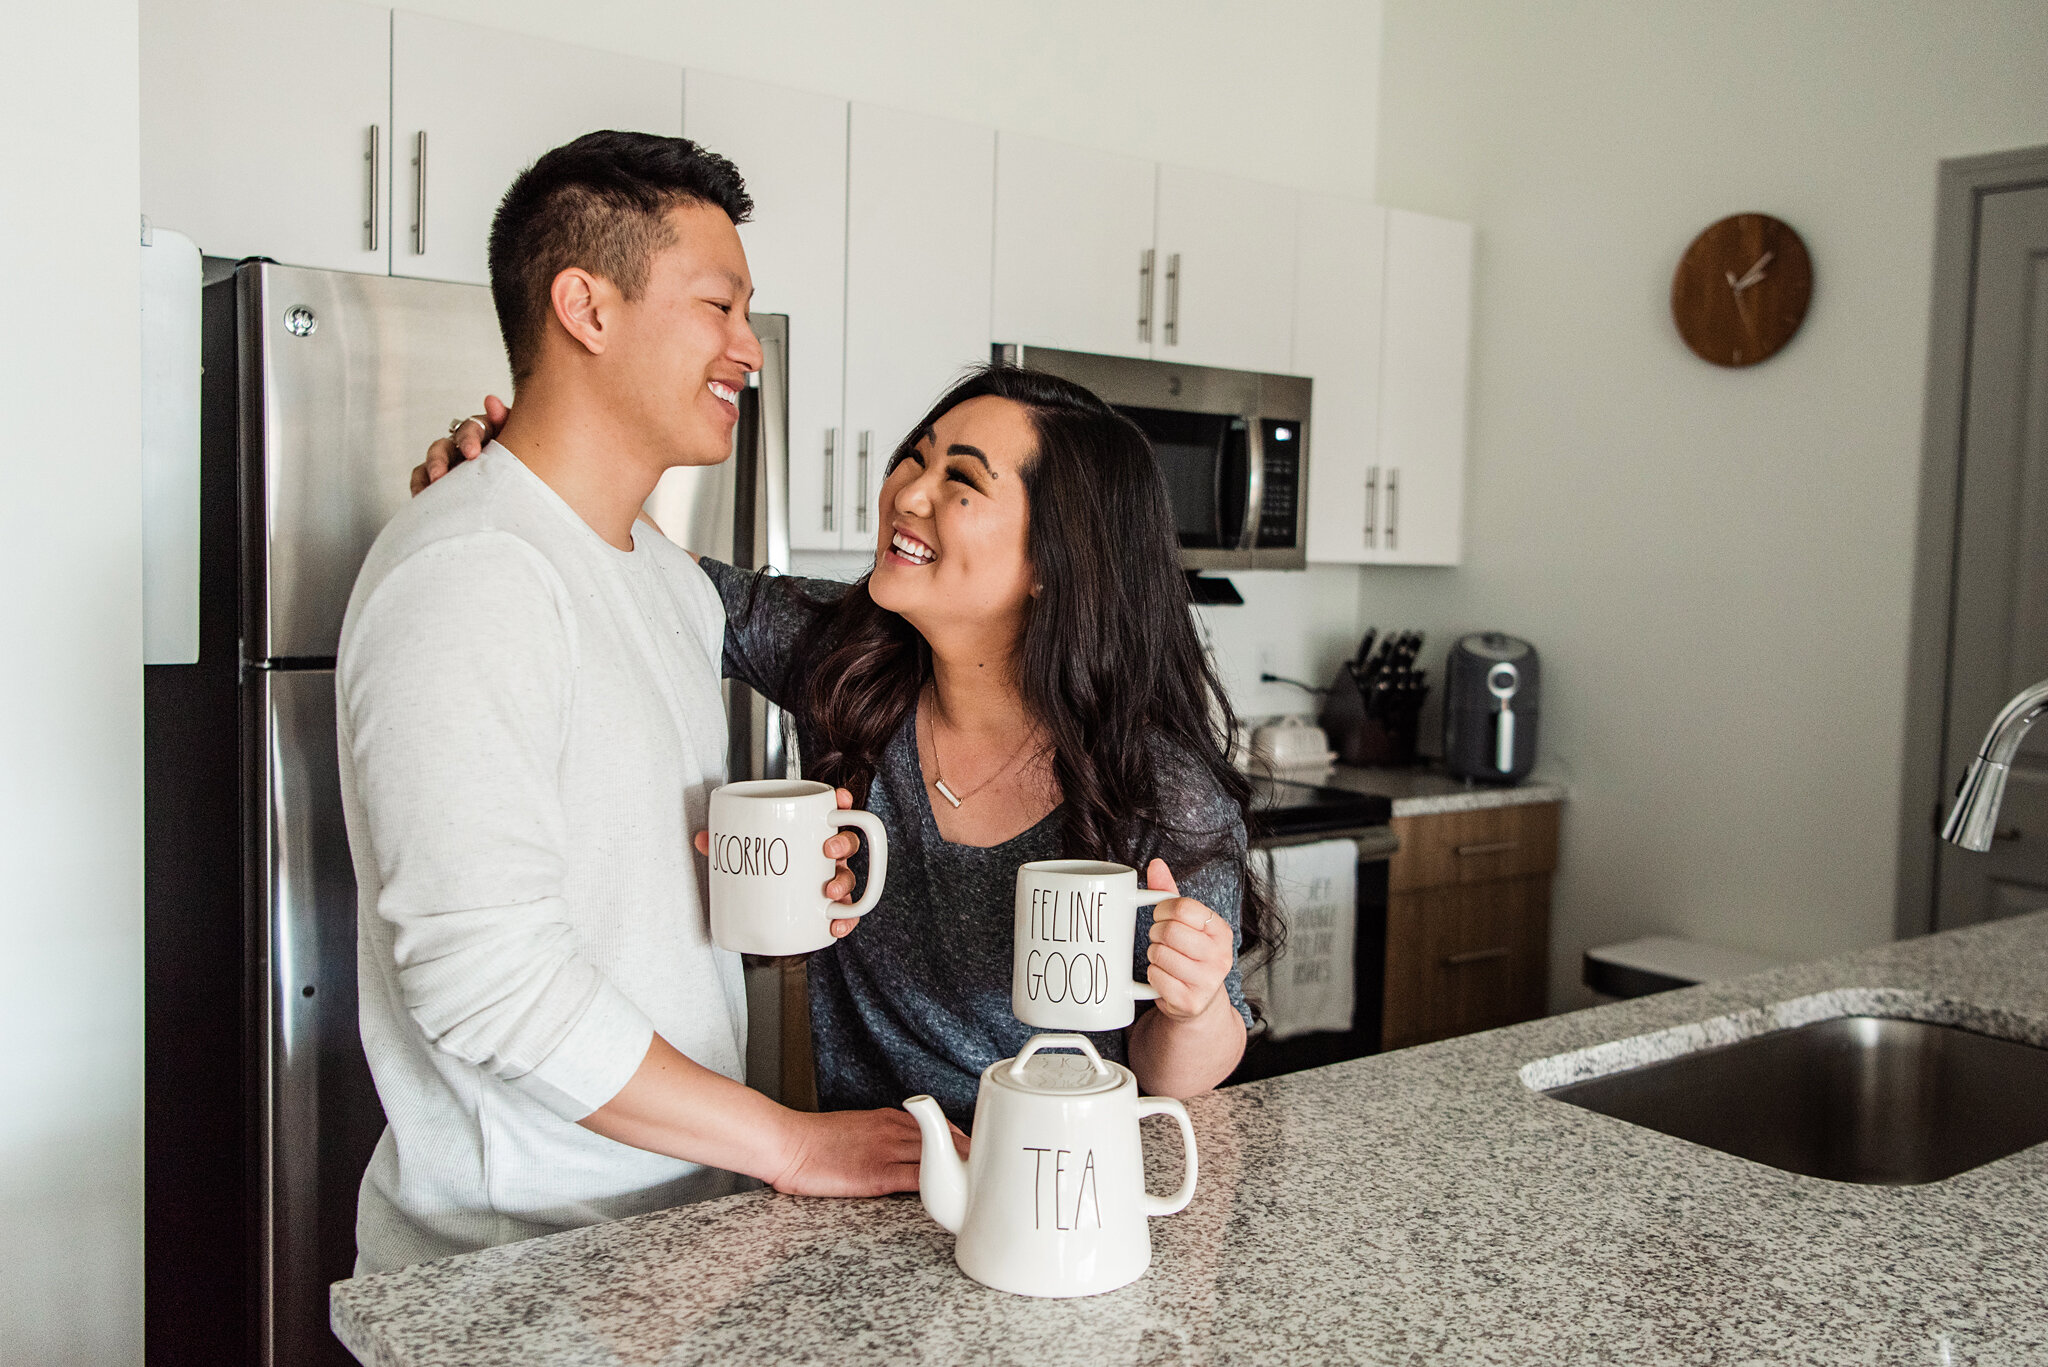 In_Home_Rochester_Couples_Session_JILL_STUDIO_Rochester_NY_Photographer_4224.jpg